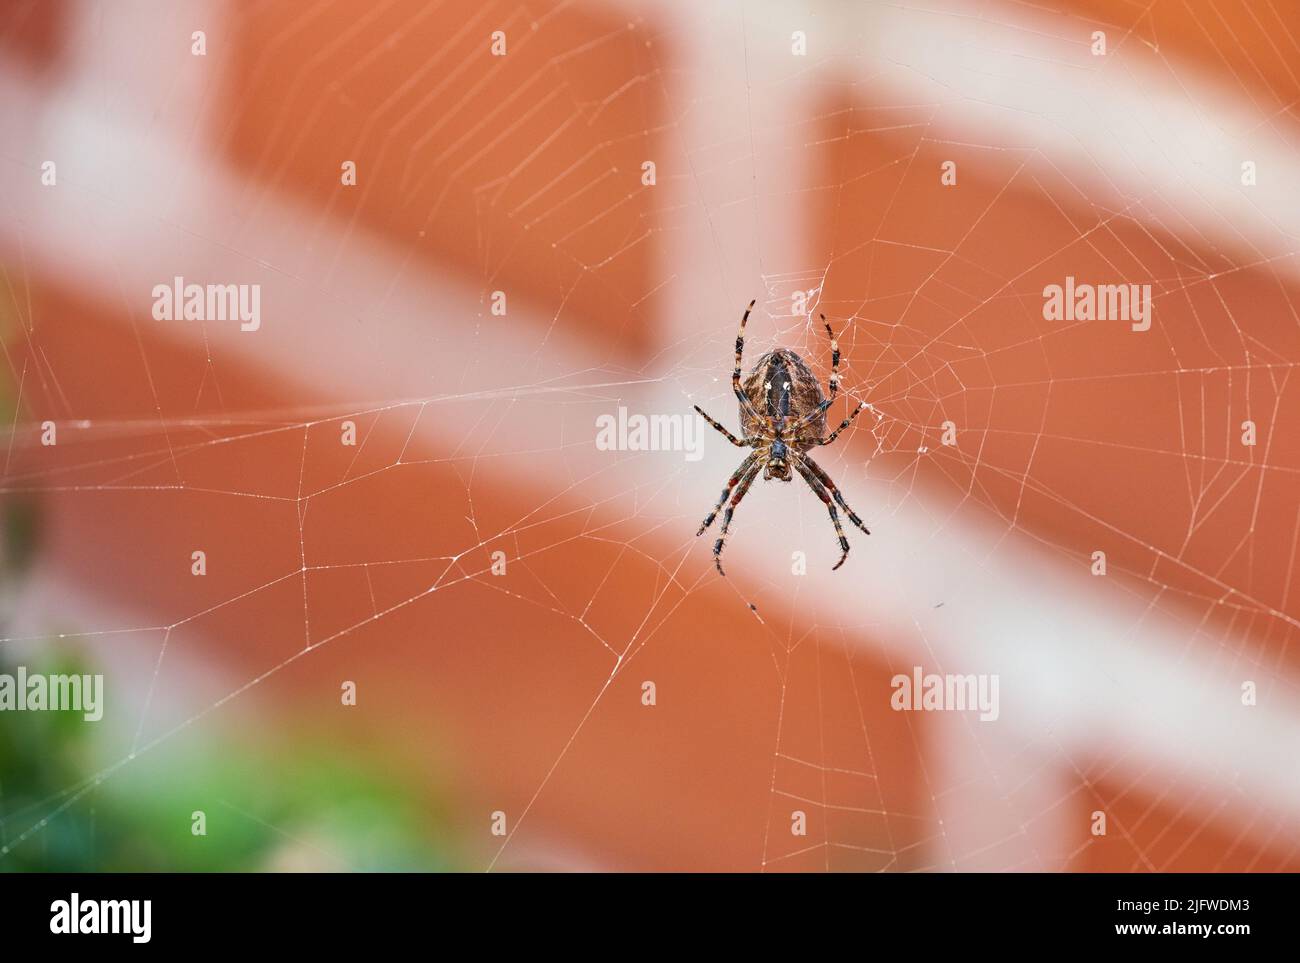 A brown walnut orb weaver spider on its web from below, against blurred background of red brick house. Striped black arachnid in the center of its Stock Photo